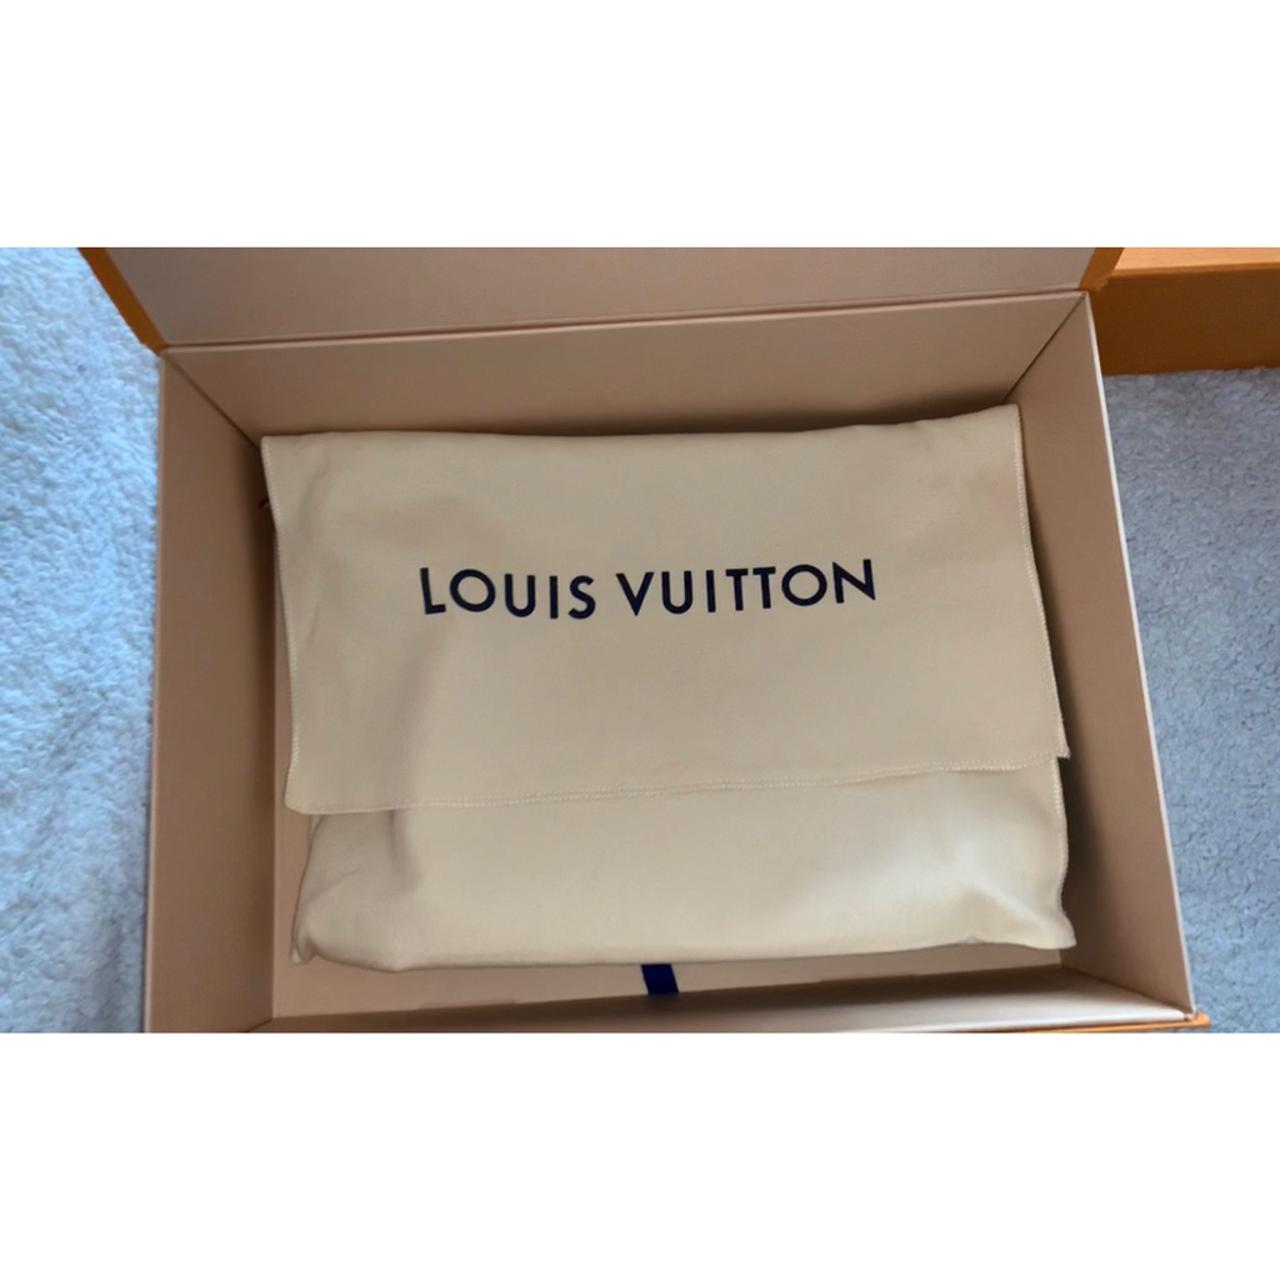 Boutique on Instagram: Louis vuitton With box and dust bag 20.5